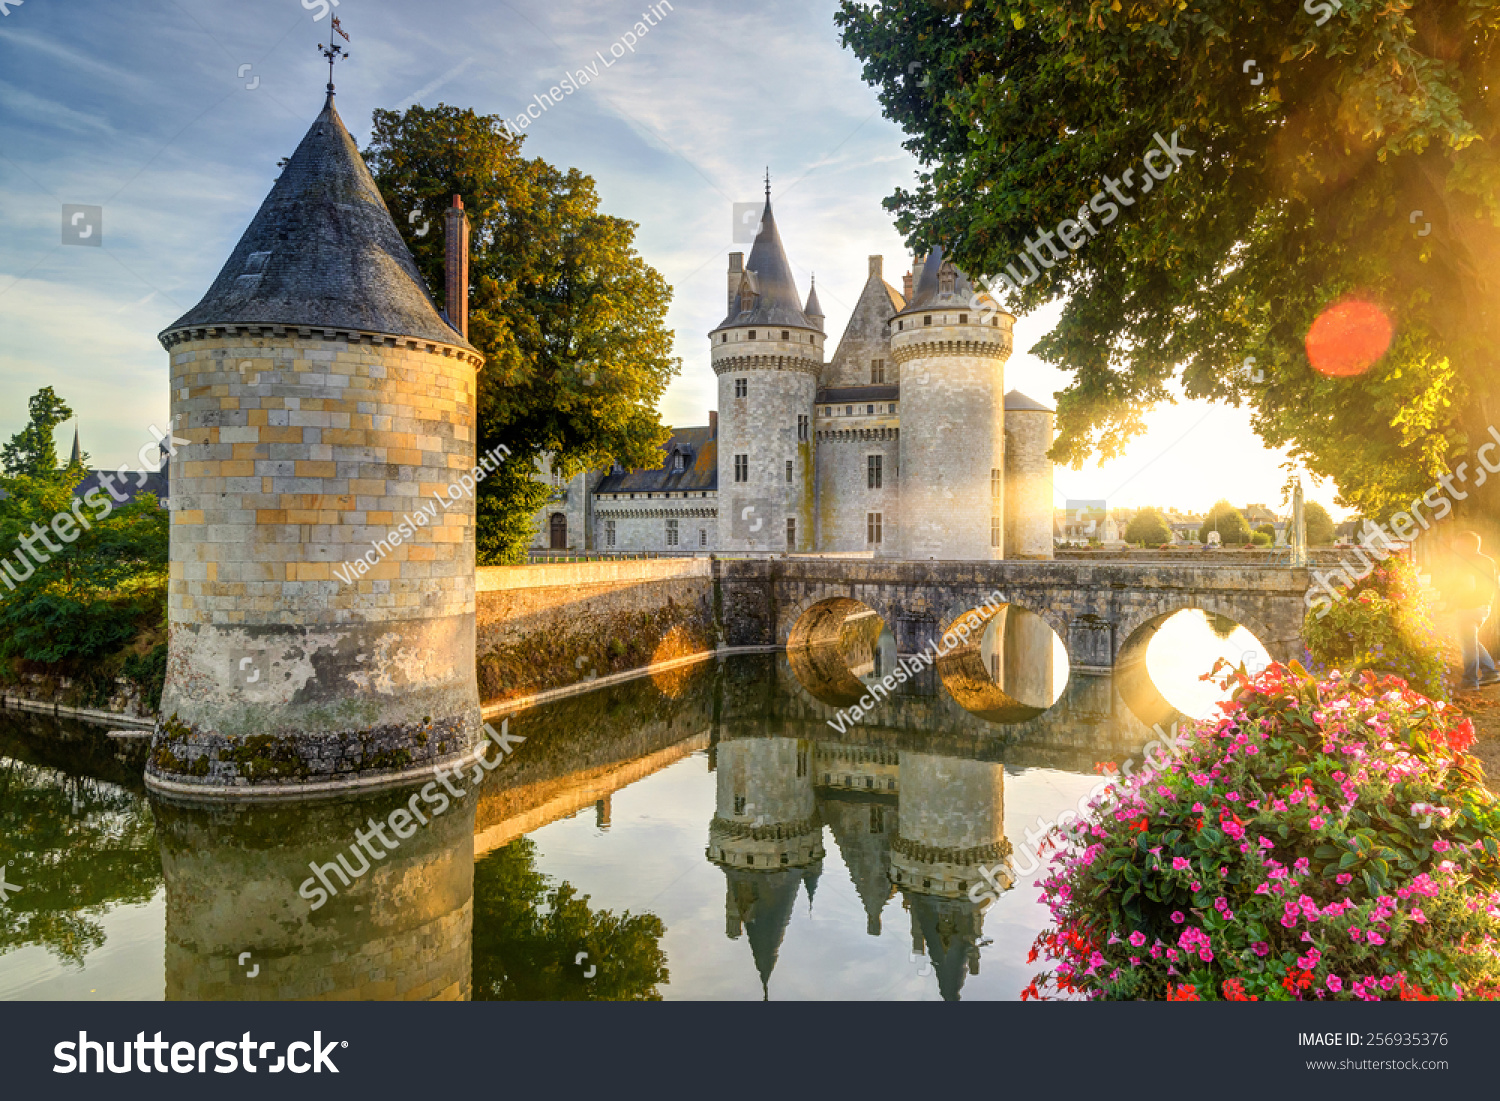 Castle Chateau de Sully-sur-Loire at sunset, France. It is famous landmark of Loire Valley. Beautiful sunny view of medieval castle, nice landscape of old France in summer. Sightseeing, travel theme  #256935376